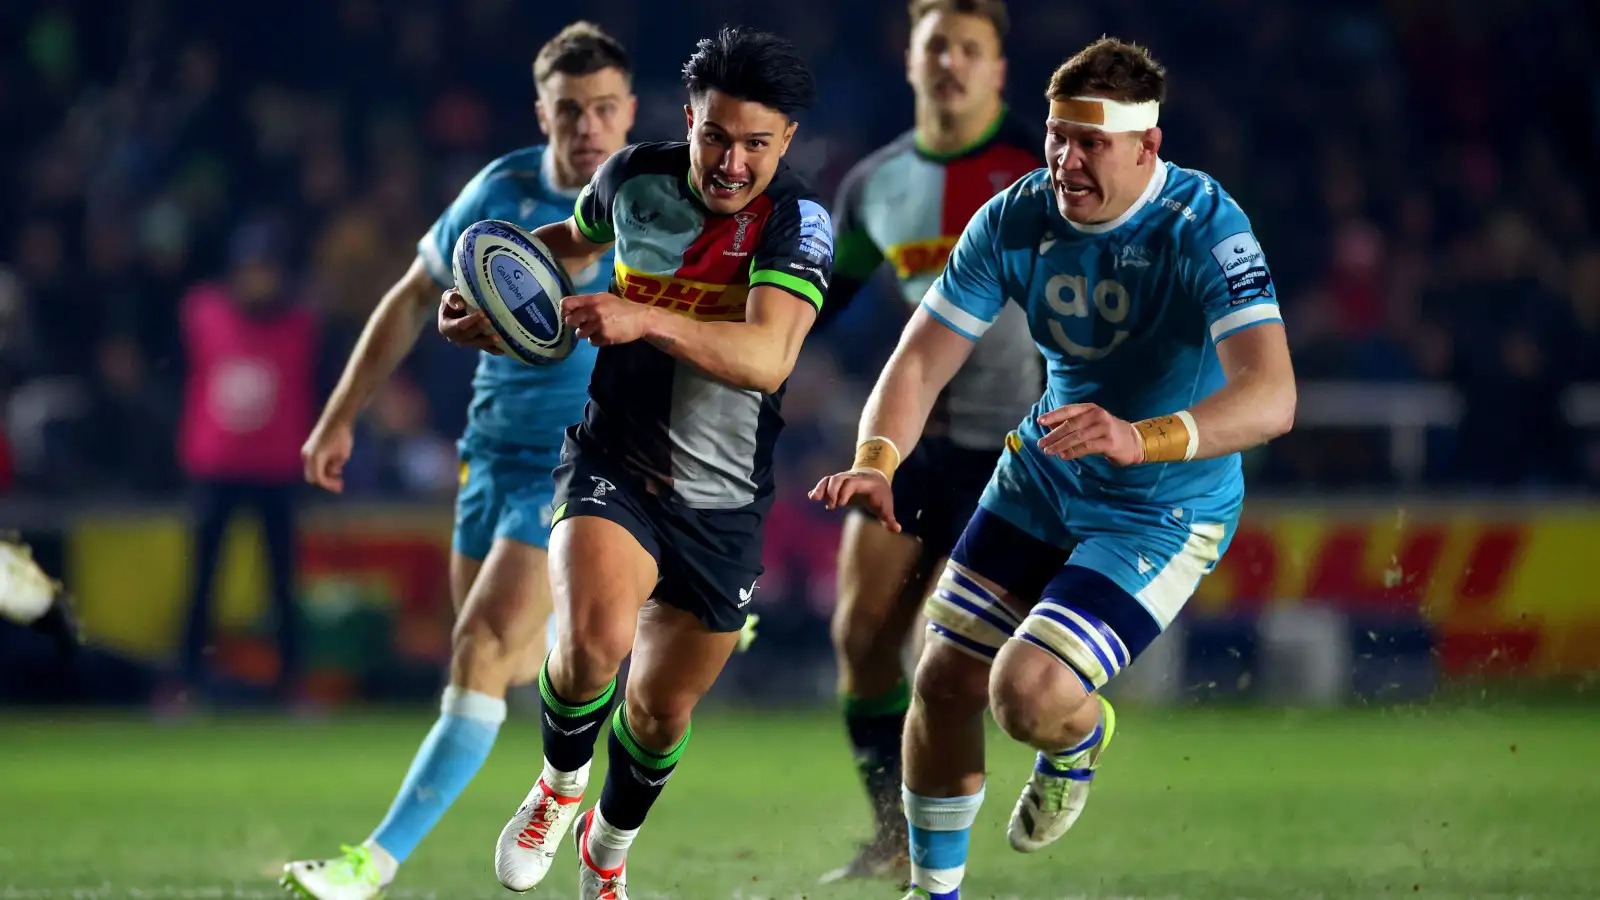 Marcus Smith on the run for Harlequins against Sale Sharks in the Premiership 2023.